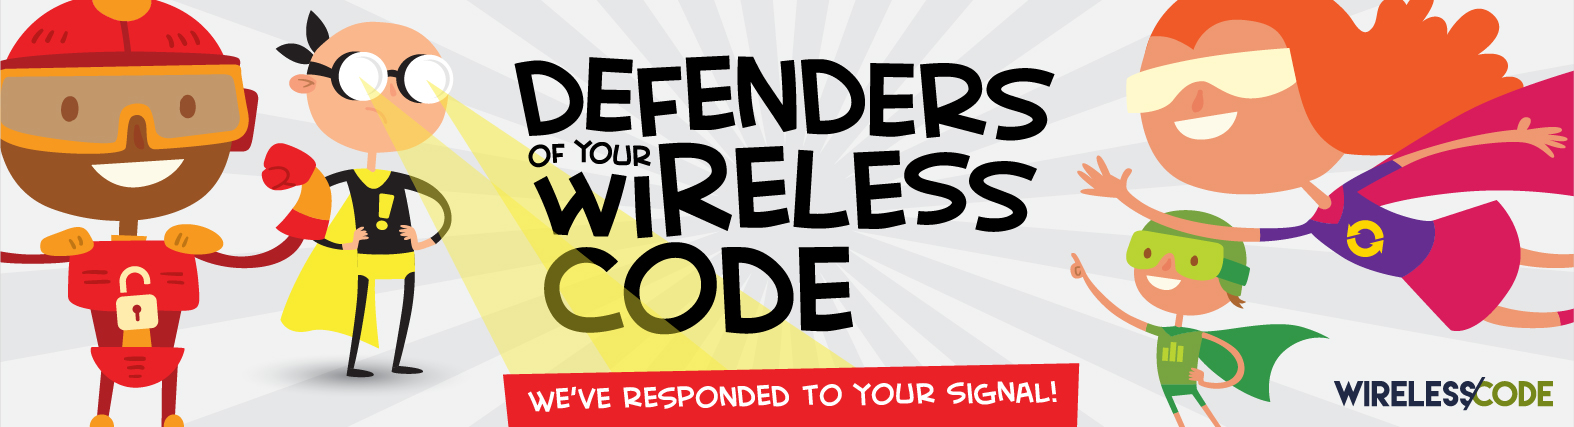 Tab 1: Defenders of your Wireless Code: We've responded to your signal!